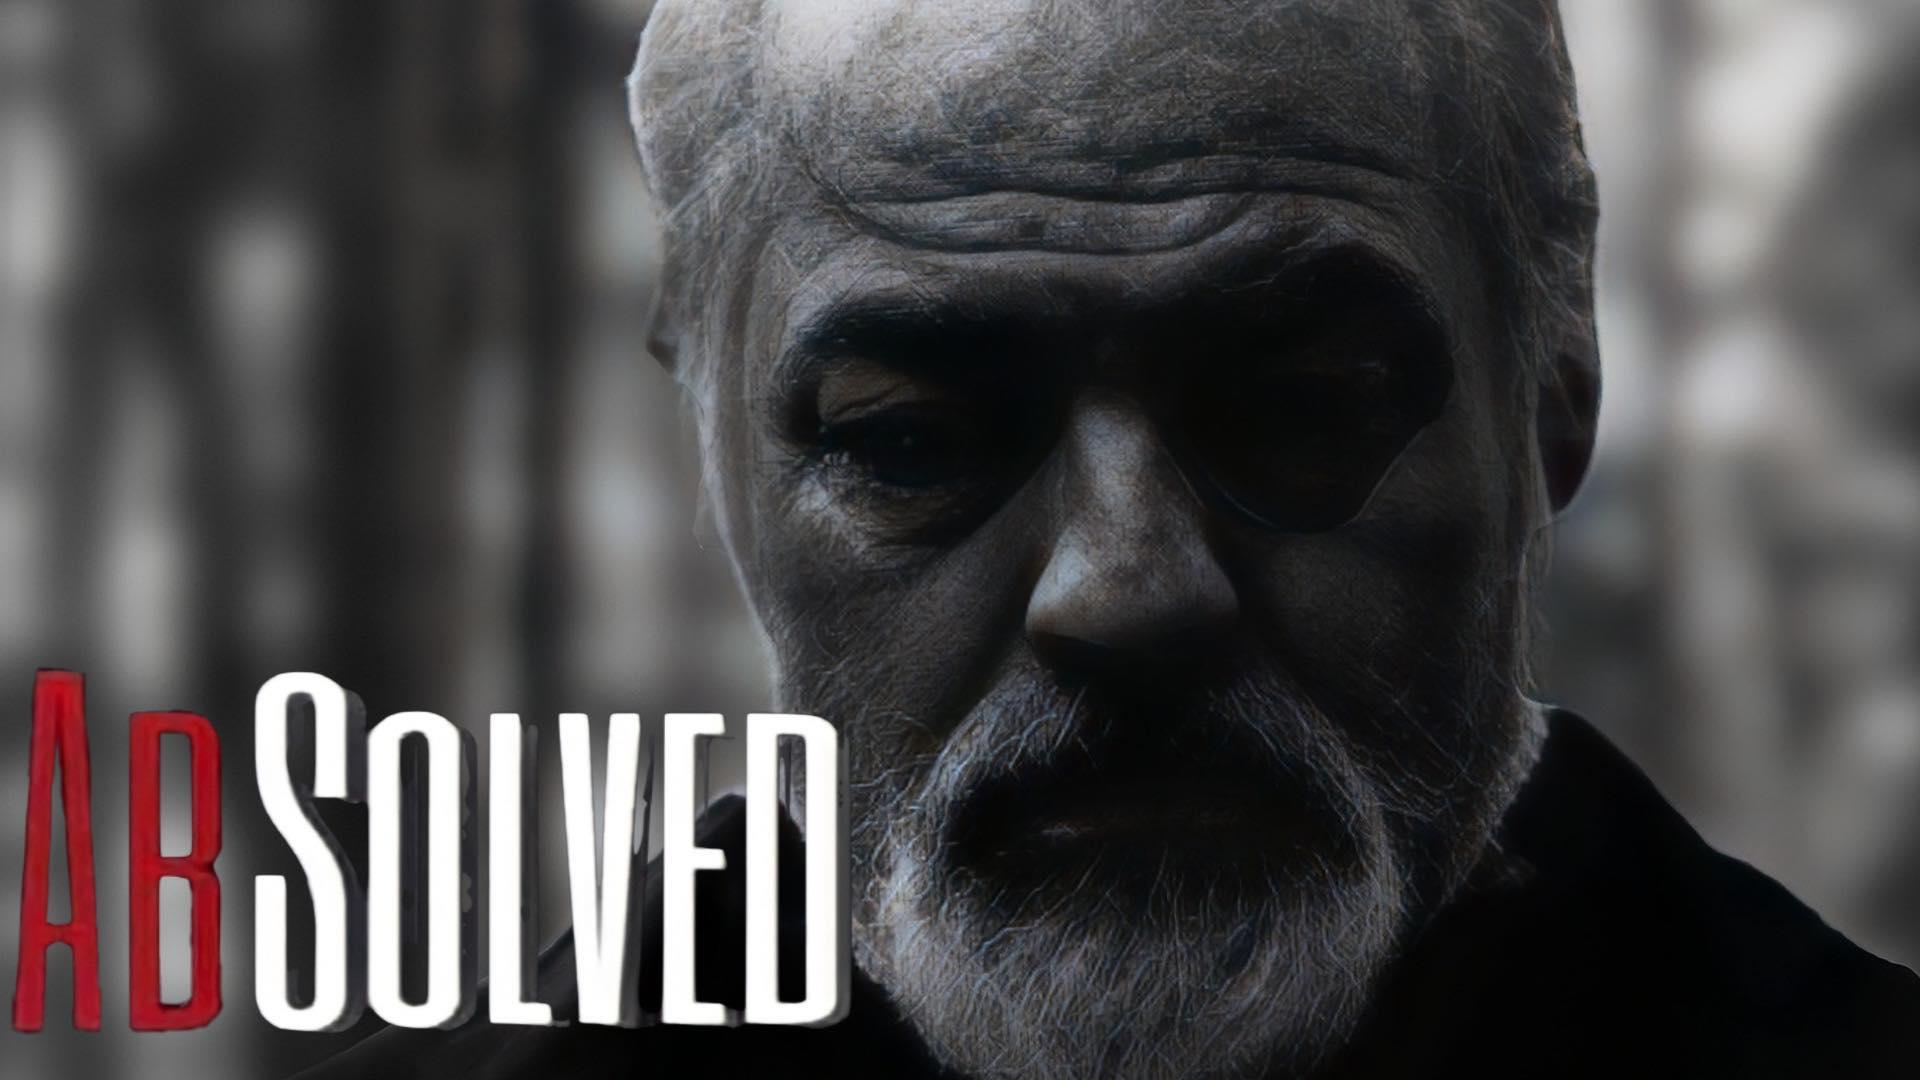 AbSolved Trailer